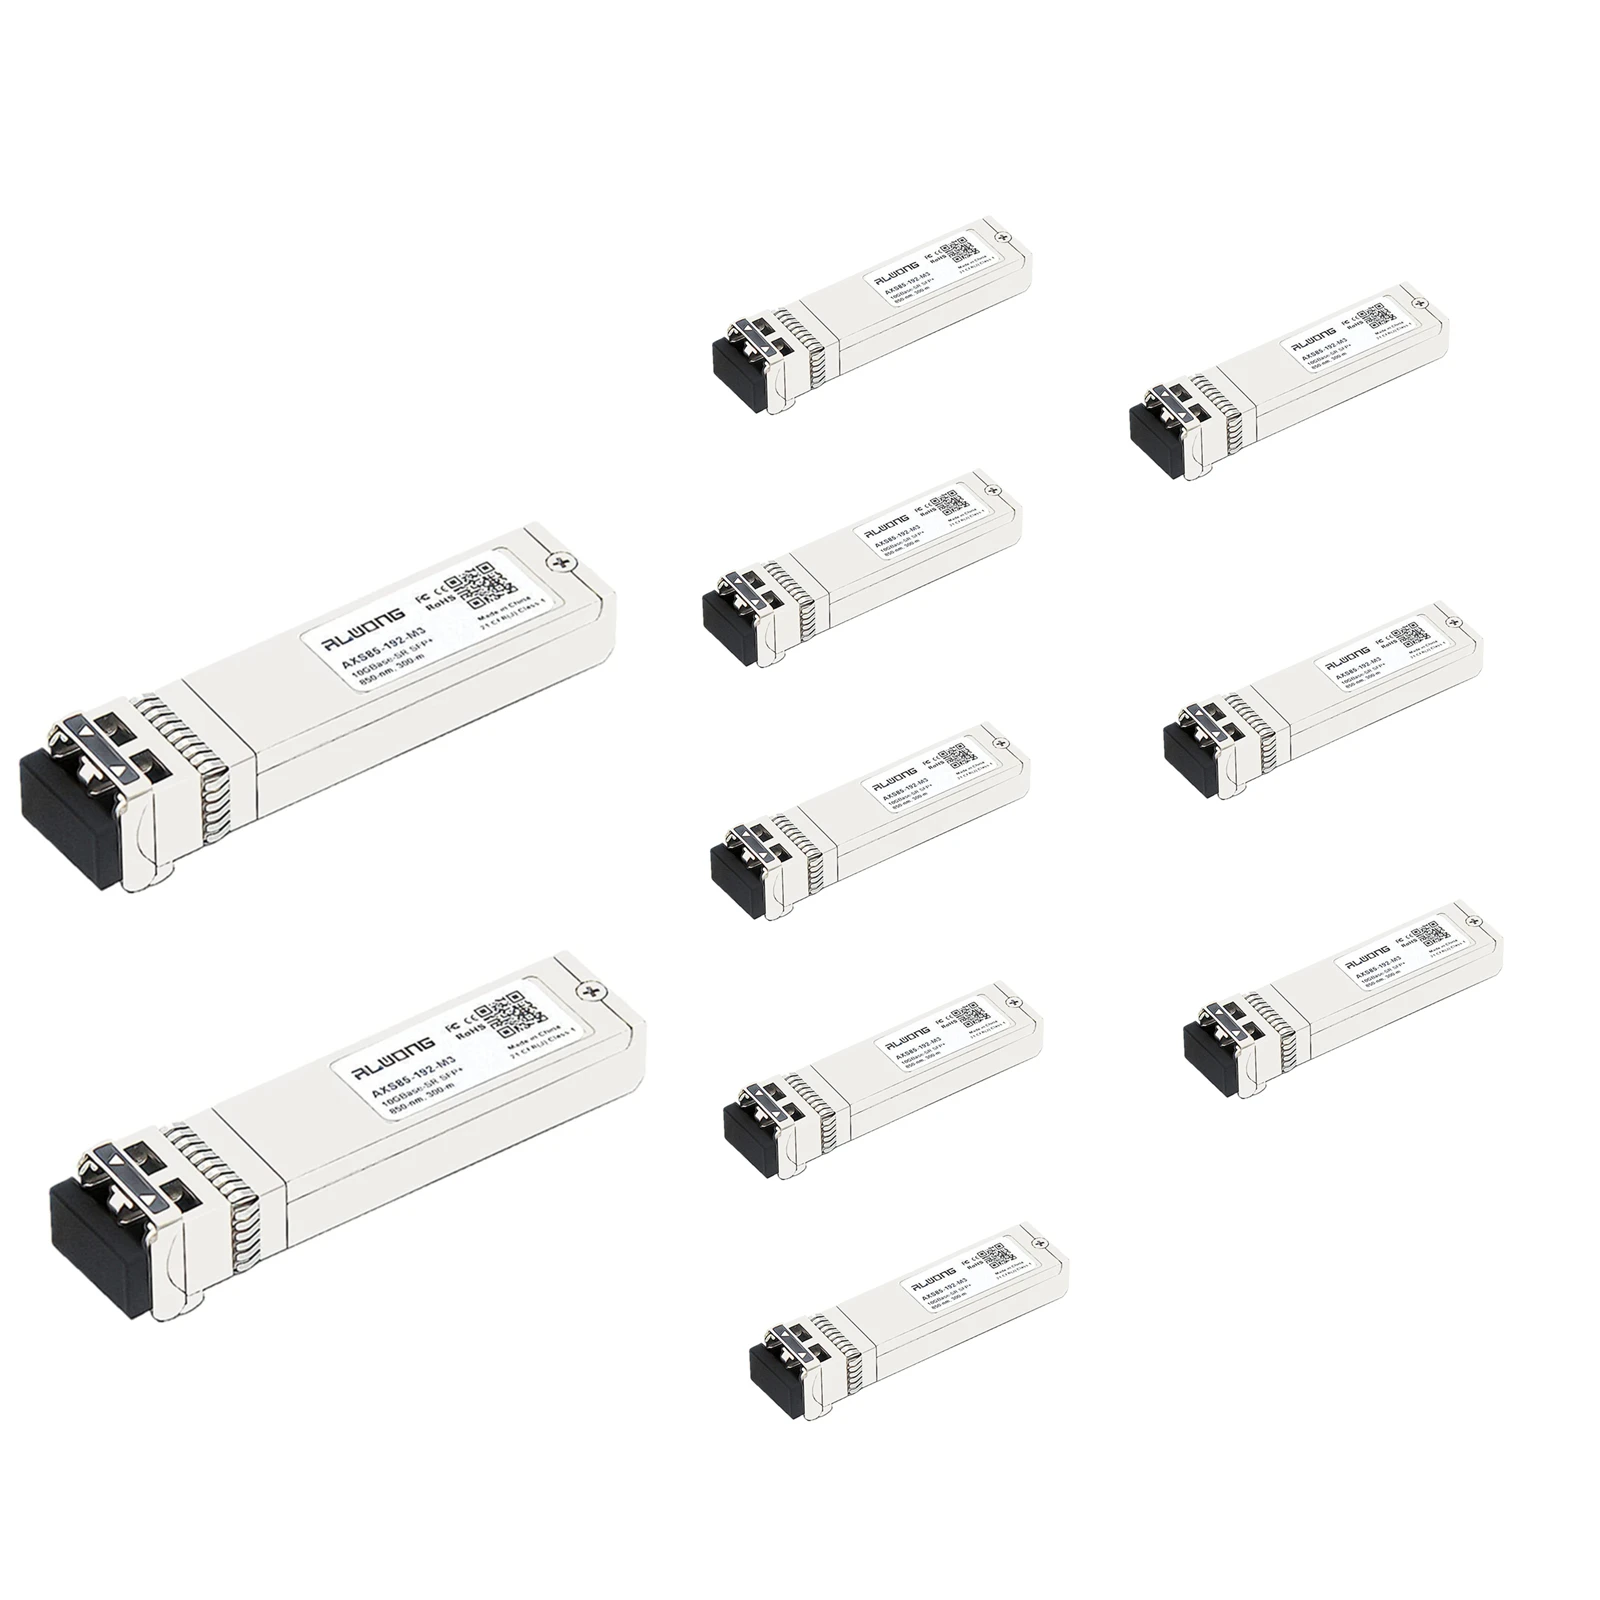 

10-Pack 10GBase-SR Multimode SFP+ to LC Fiber Module Transceiver Compatible with Intel E10GSFPSR, Ubiquiti, Netgear, 850nm MMF